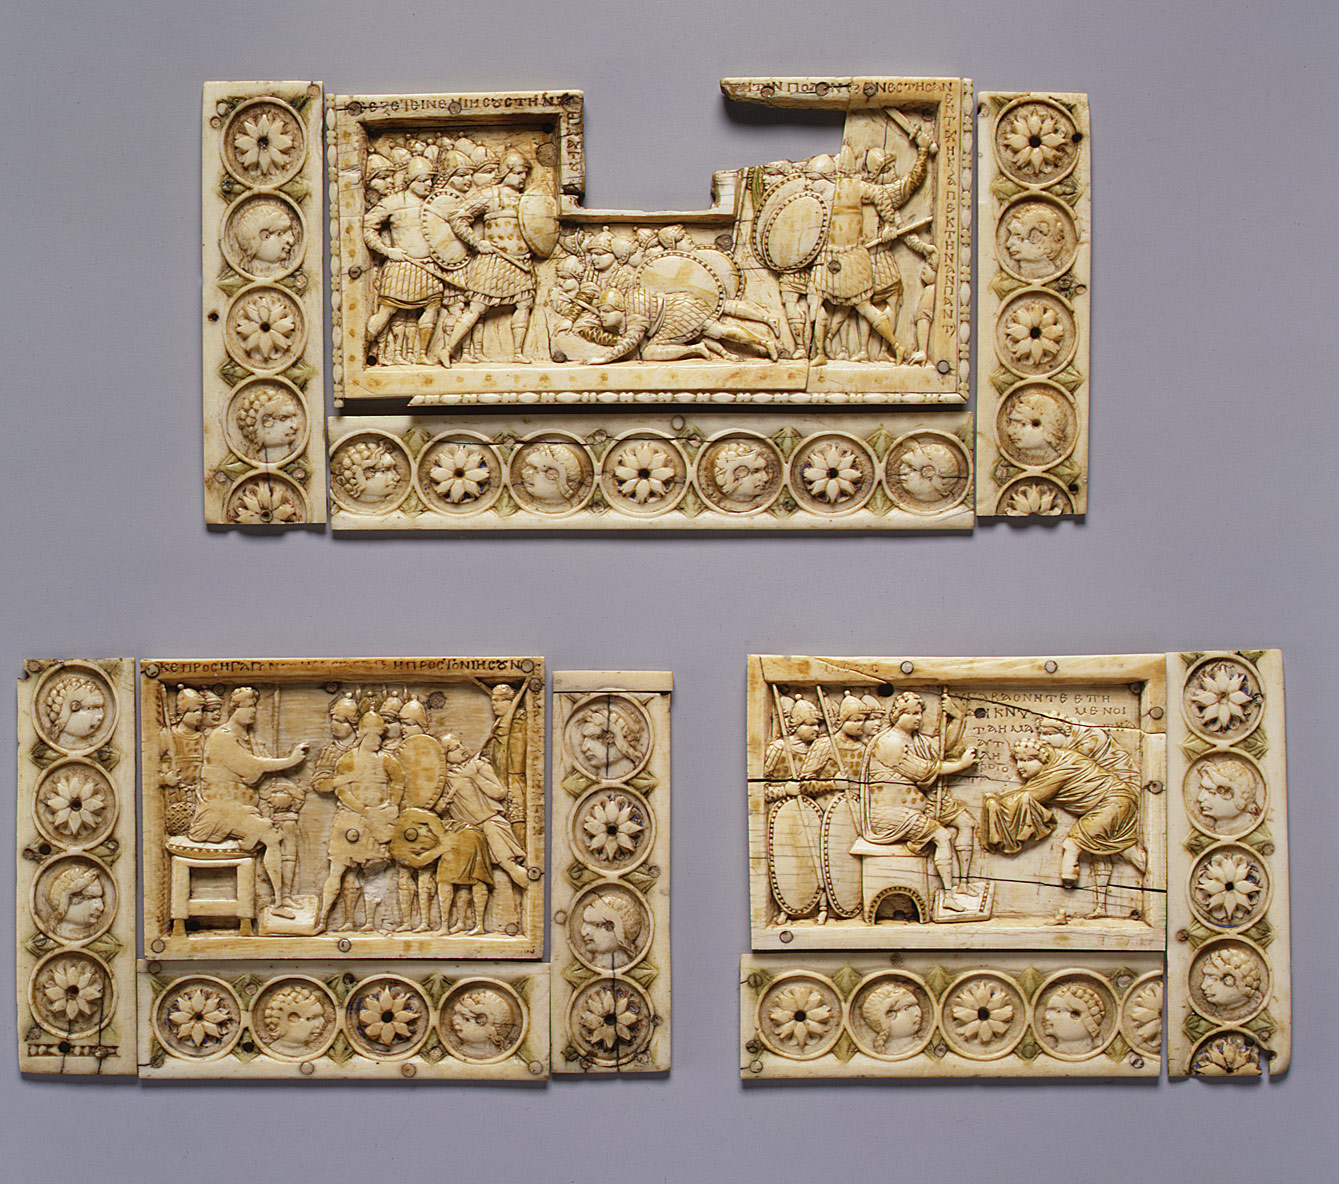 Plaques with Scenes from the Story of Joshua